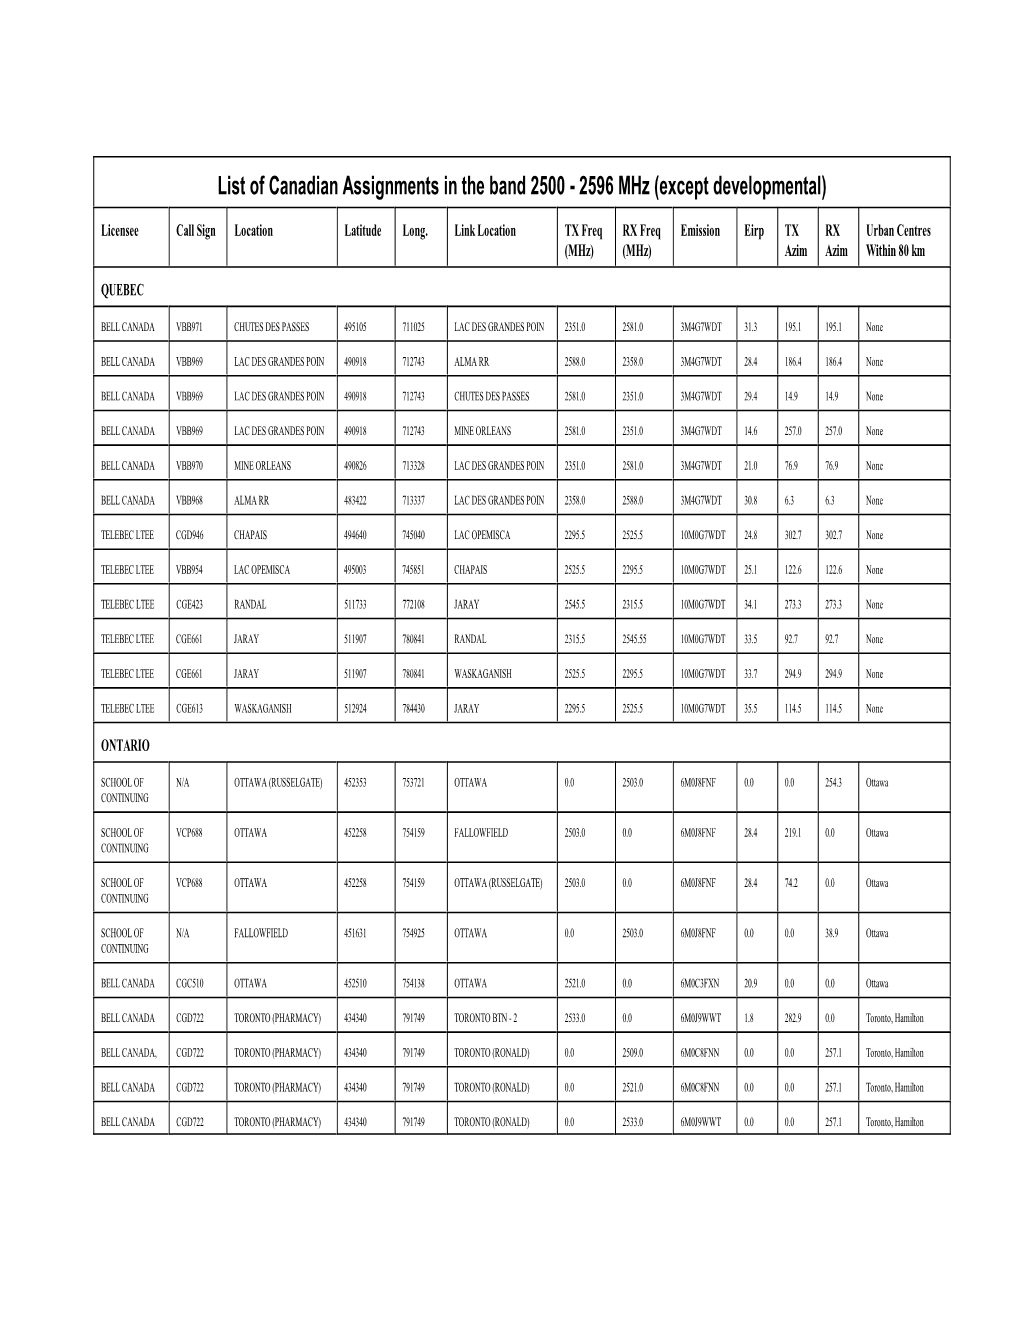 List of Canadian Assignments in the Band 2500 - 2596 Mhz (Except Developmental)